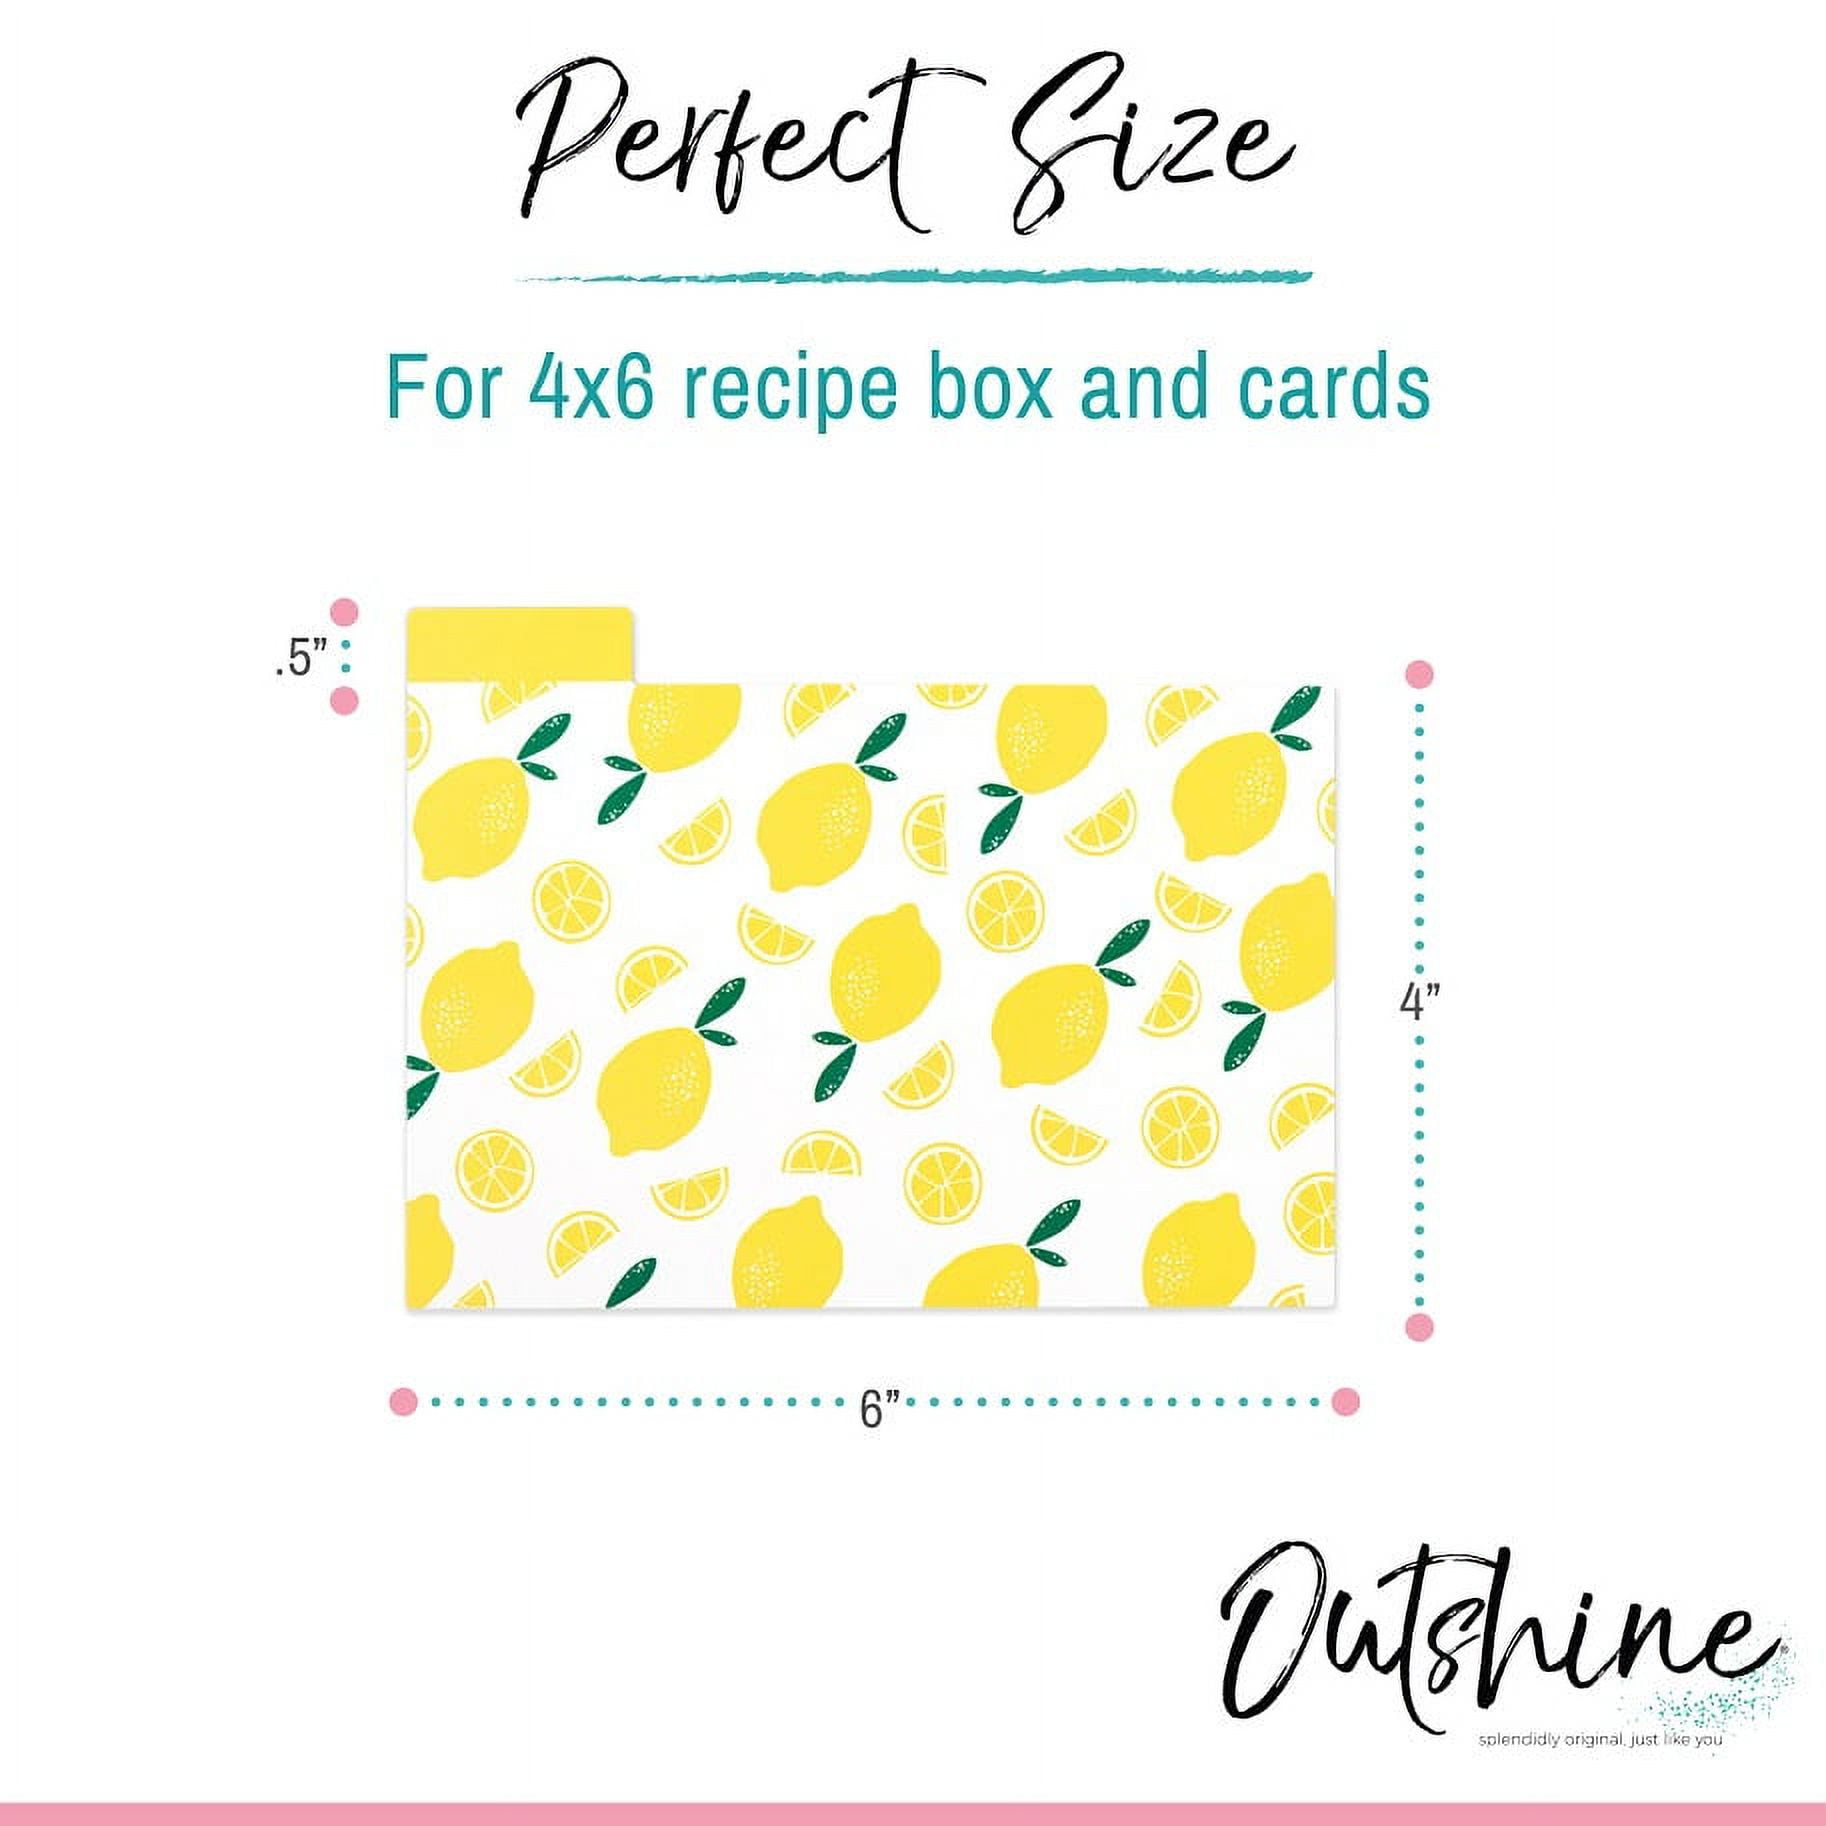 4x6 Printable Decorative Index Cards – Candid With a Side of Curls